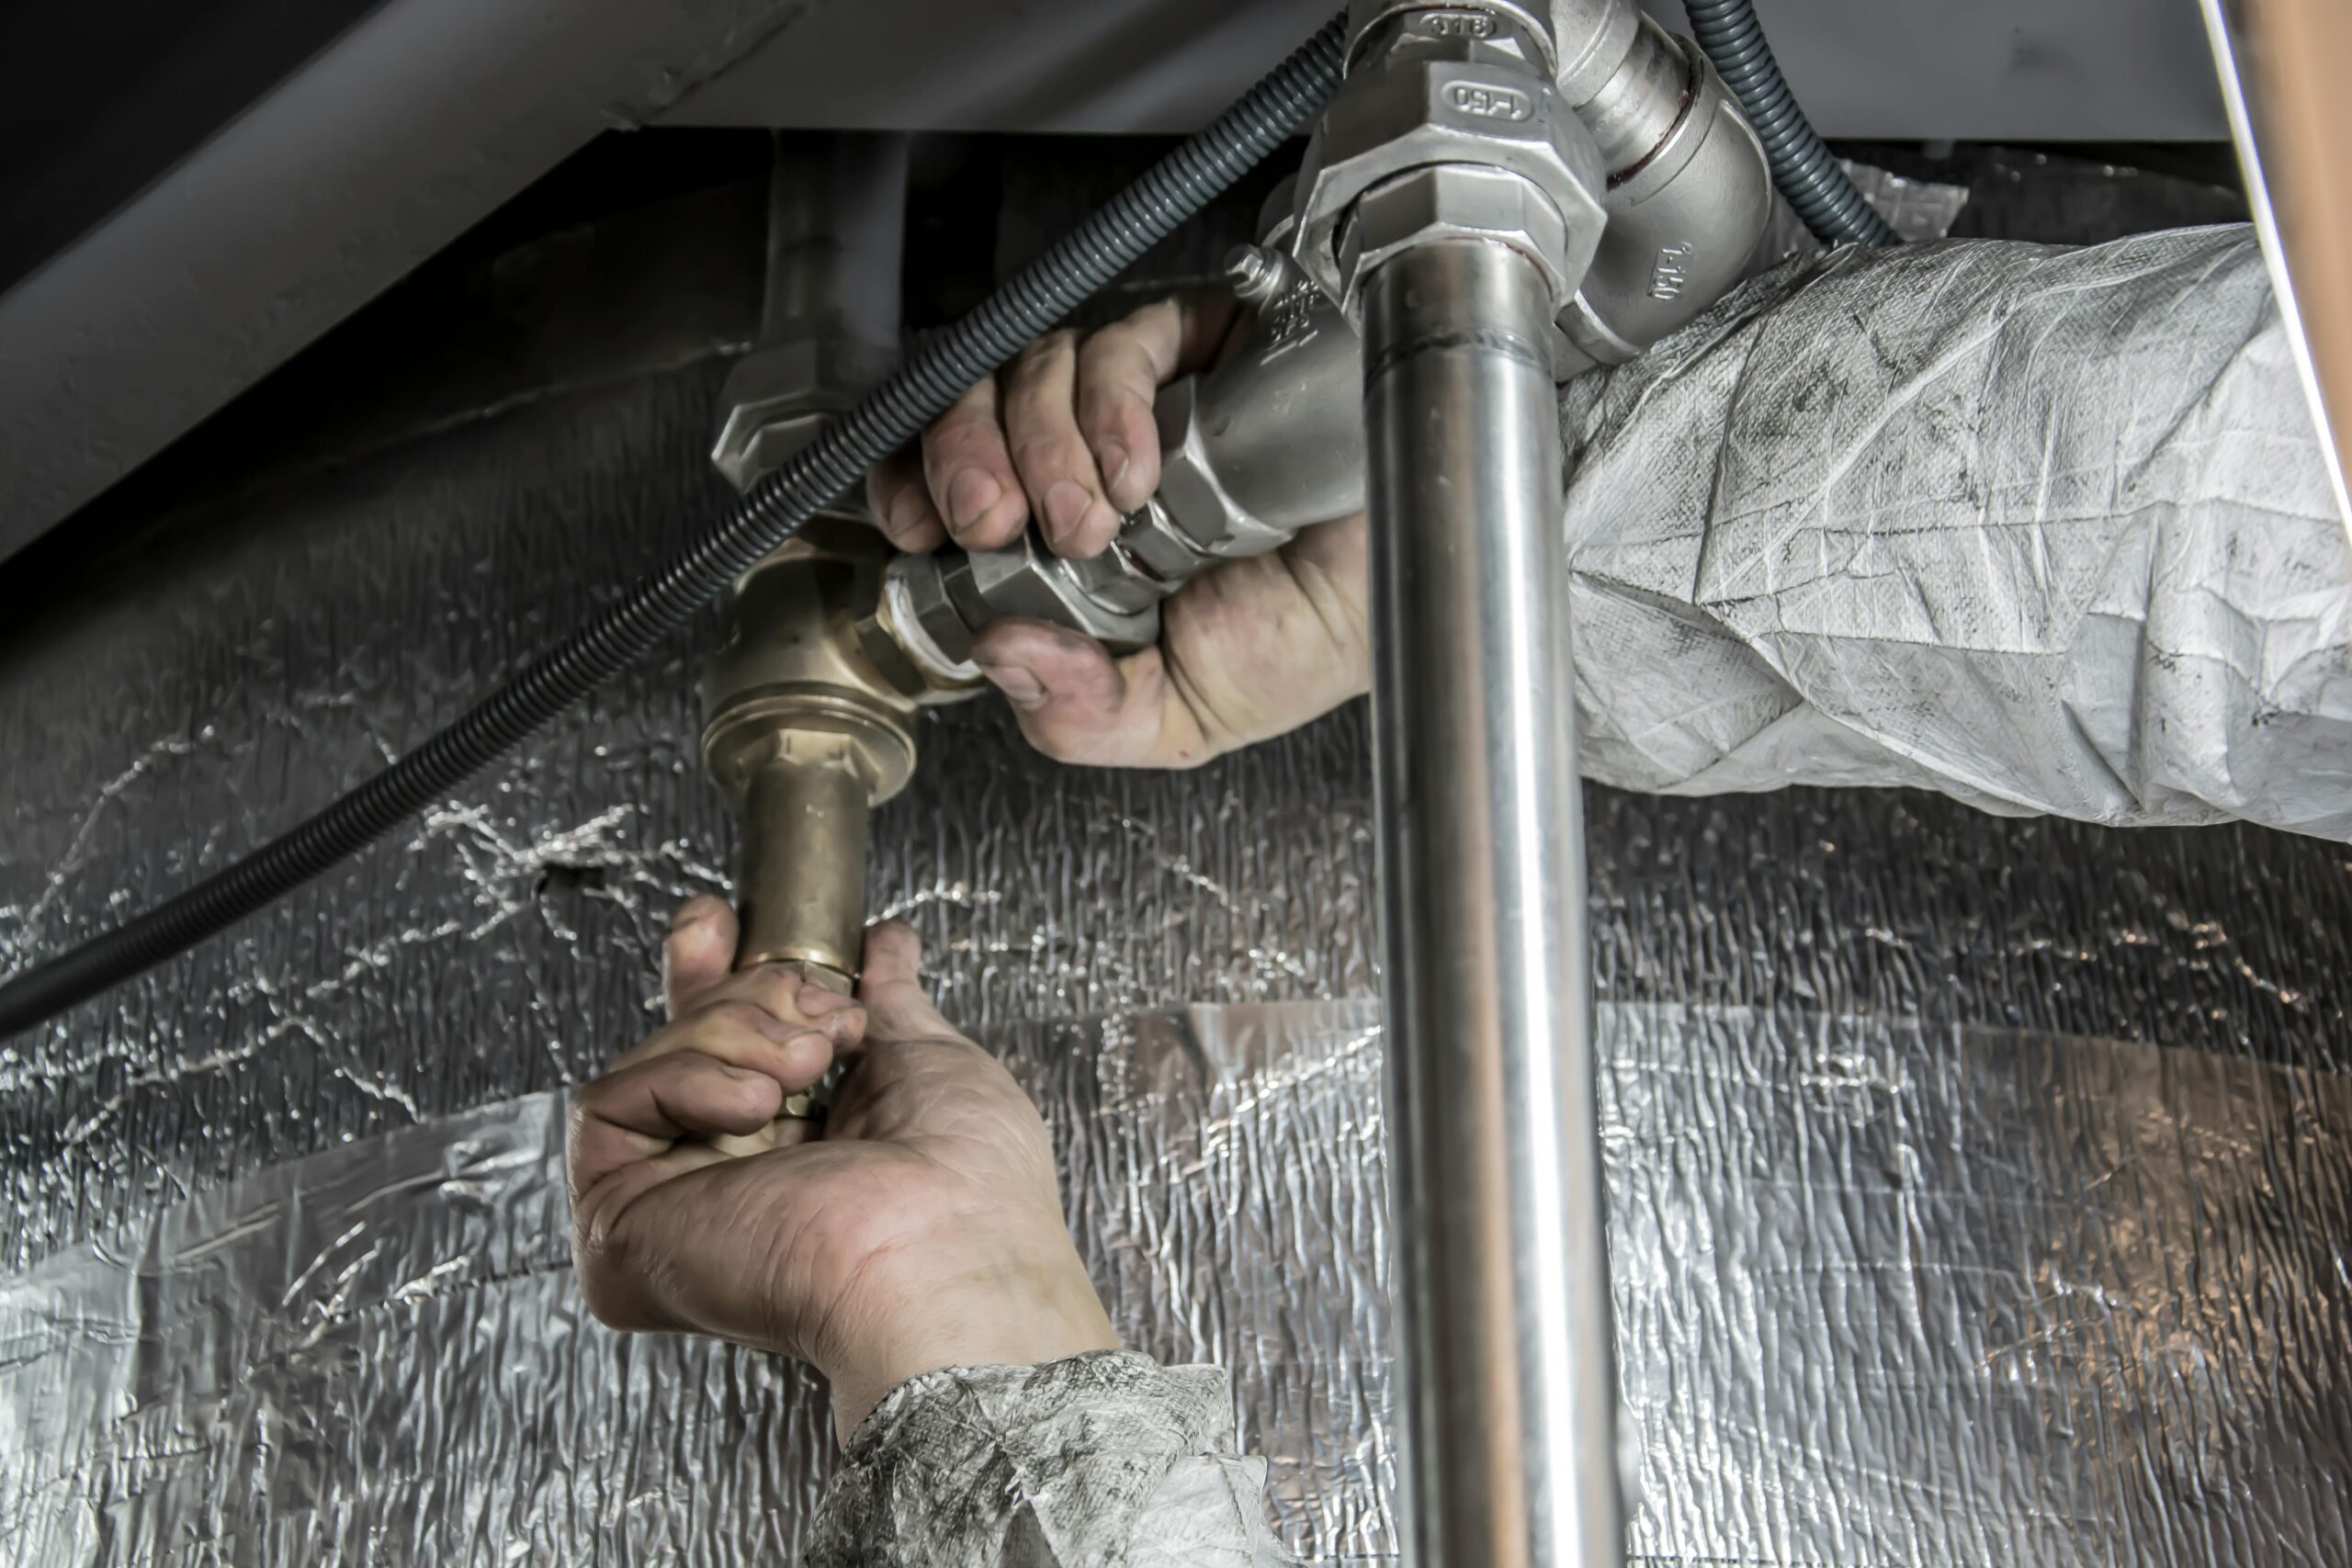 Achieving Capabilities Plumbing Skills Every Man Should Know